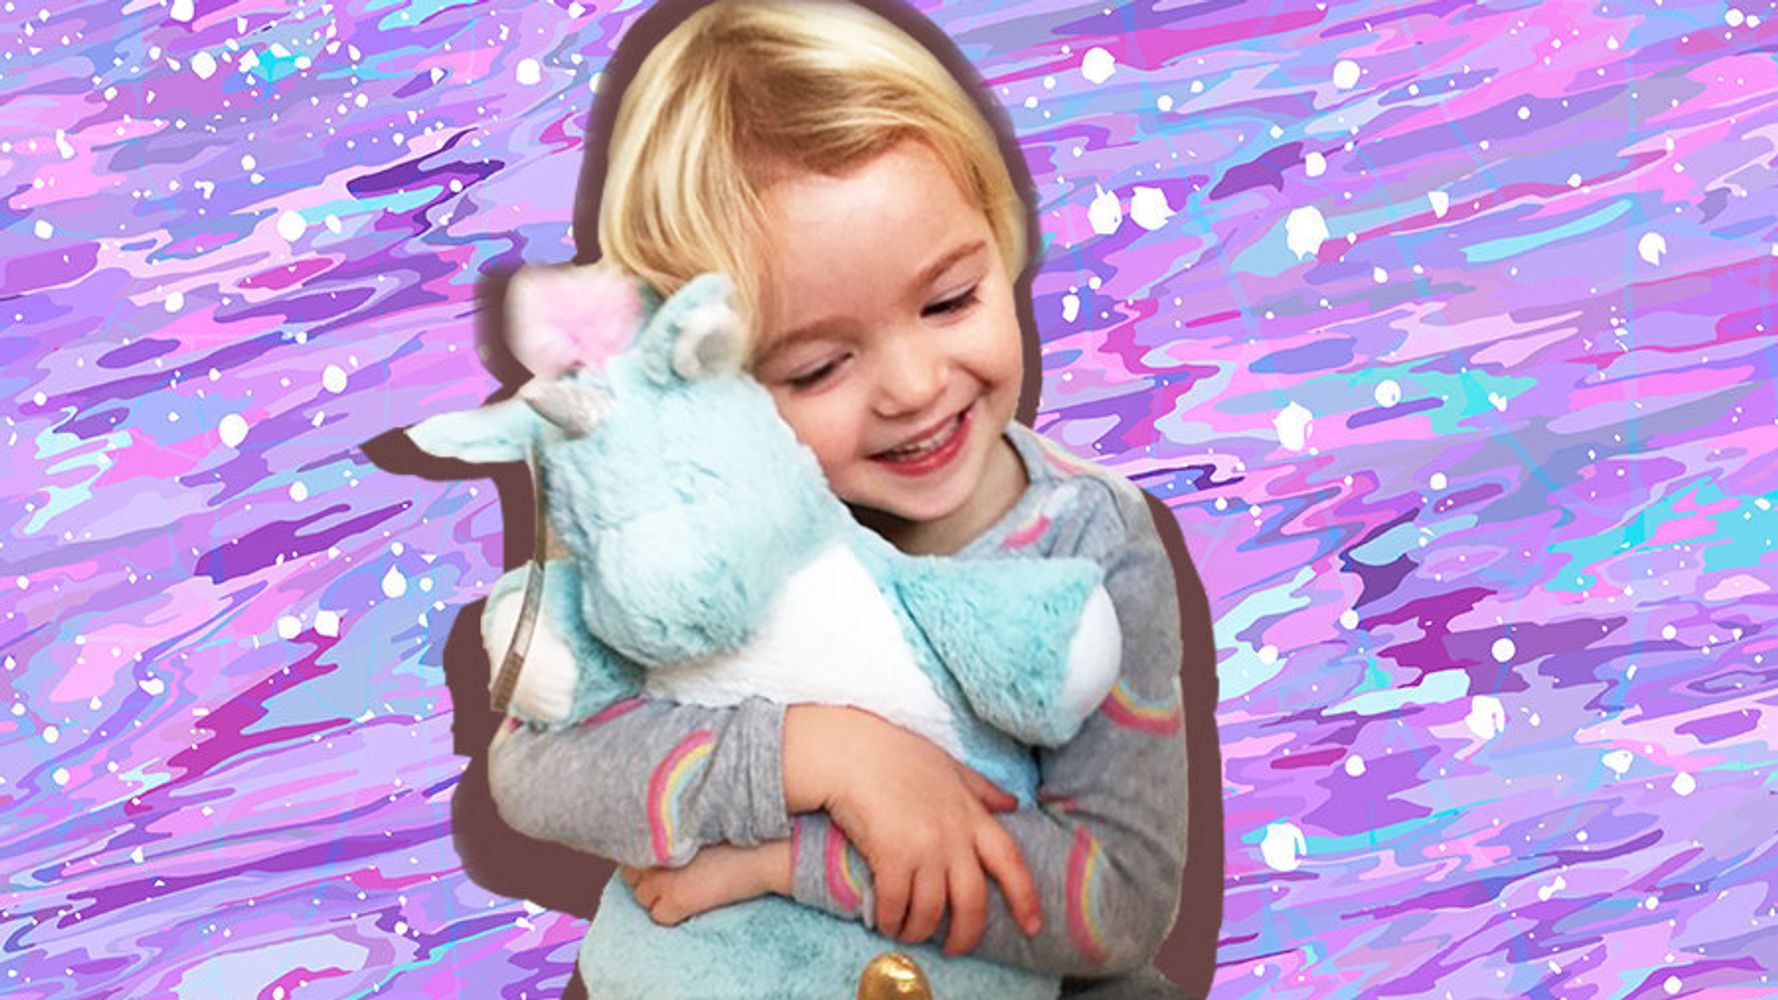 Best Unicorn Christmas Gifts For Kids, According To A 5-Year-Old